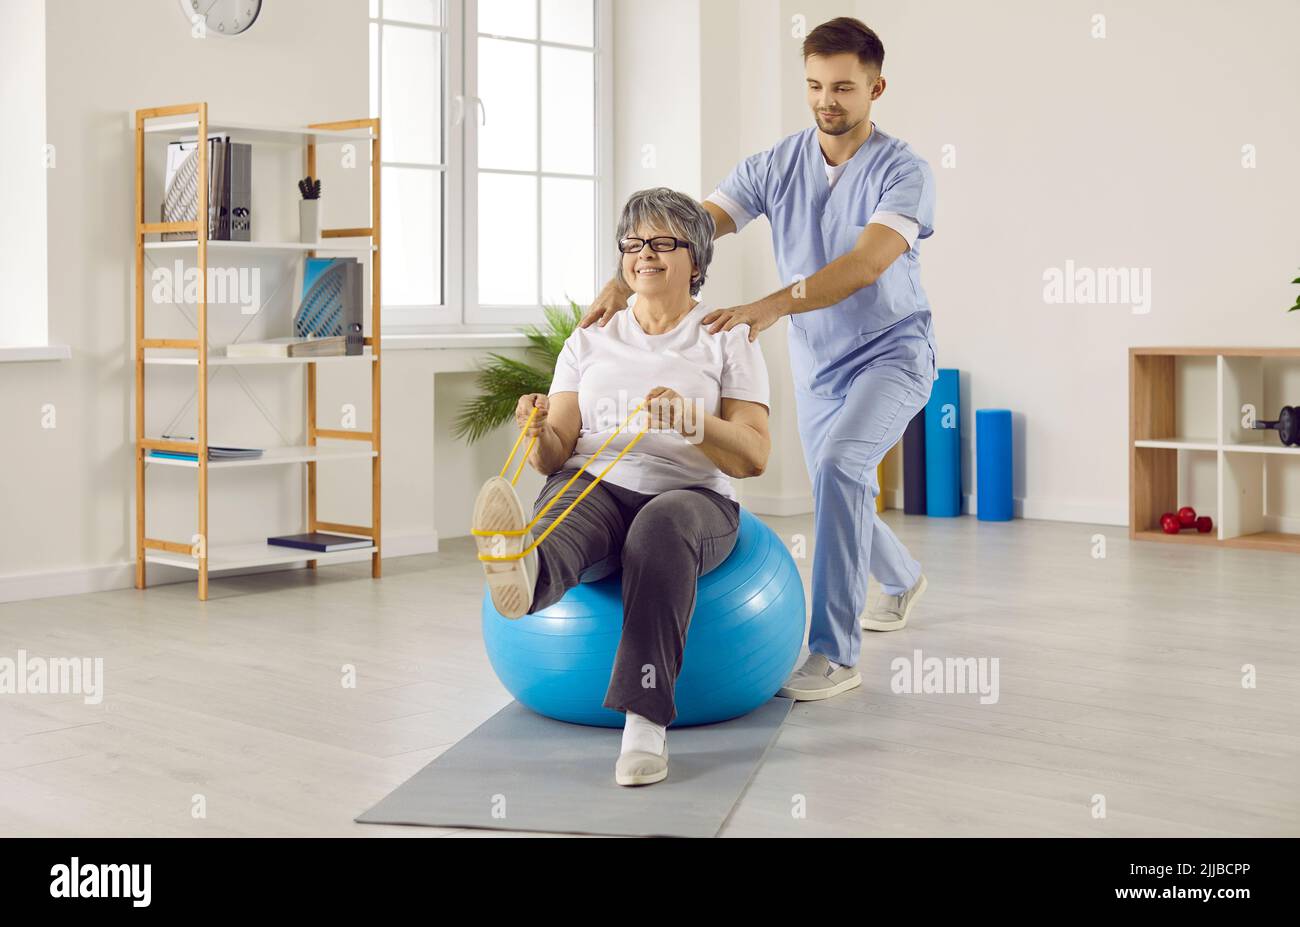 Professional male physiotherapist works with senior female patient in rehabilitation center. Stock Photo